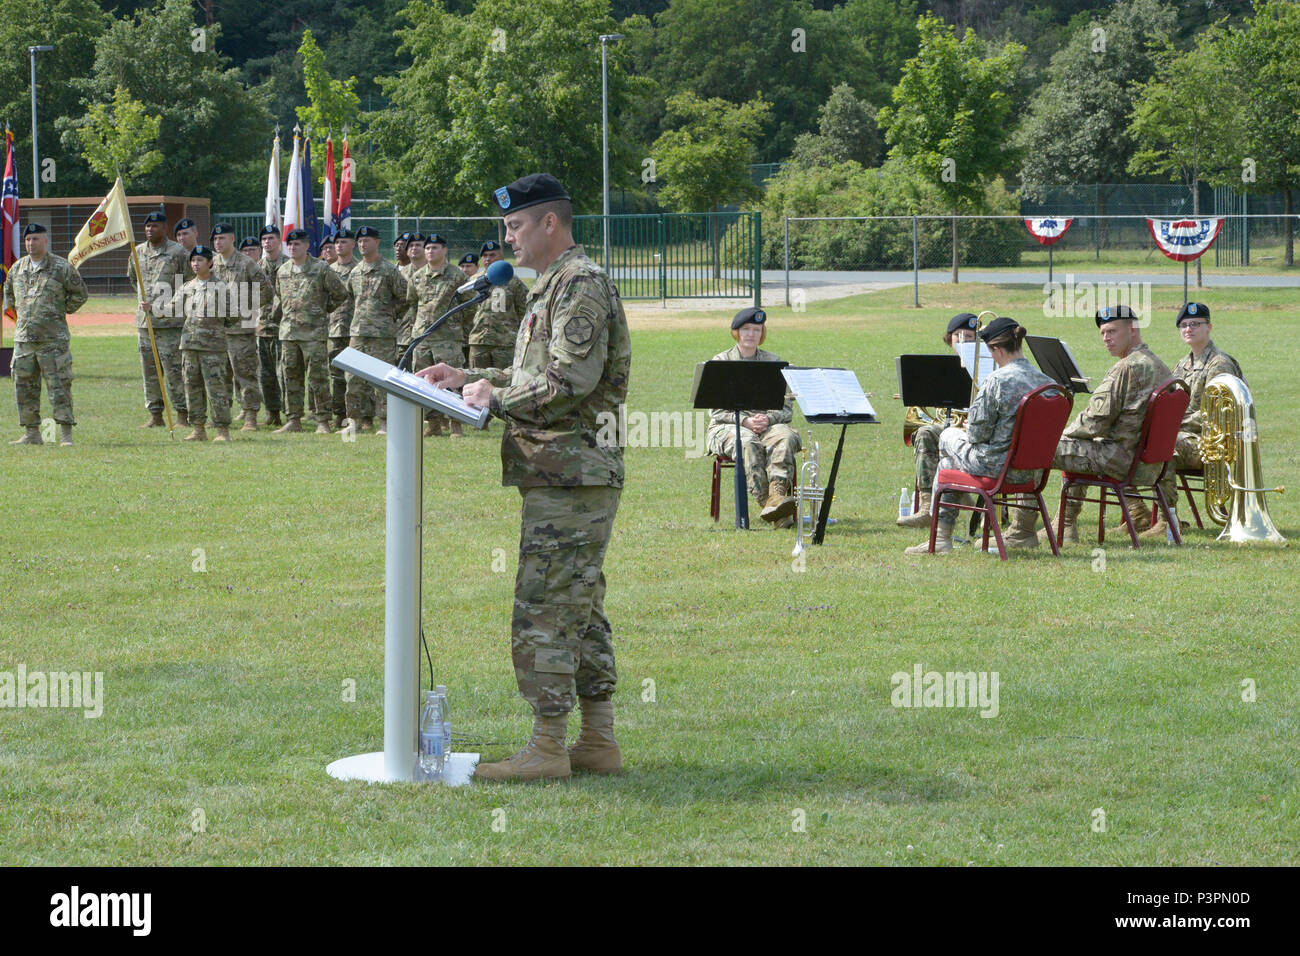 ANSBACH, Germany (July 21, 2016) – At the U.S. Army Garrison Ansbach change of command ceremony Monday at Barton Barracks here, Col. Christopher M. Benson, outgoing garrison commander, speaks to ceremony attendees. Stock Photo